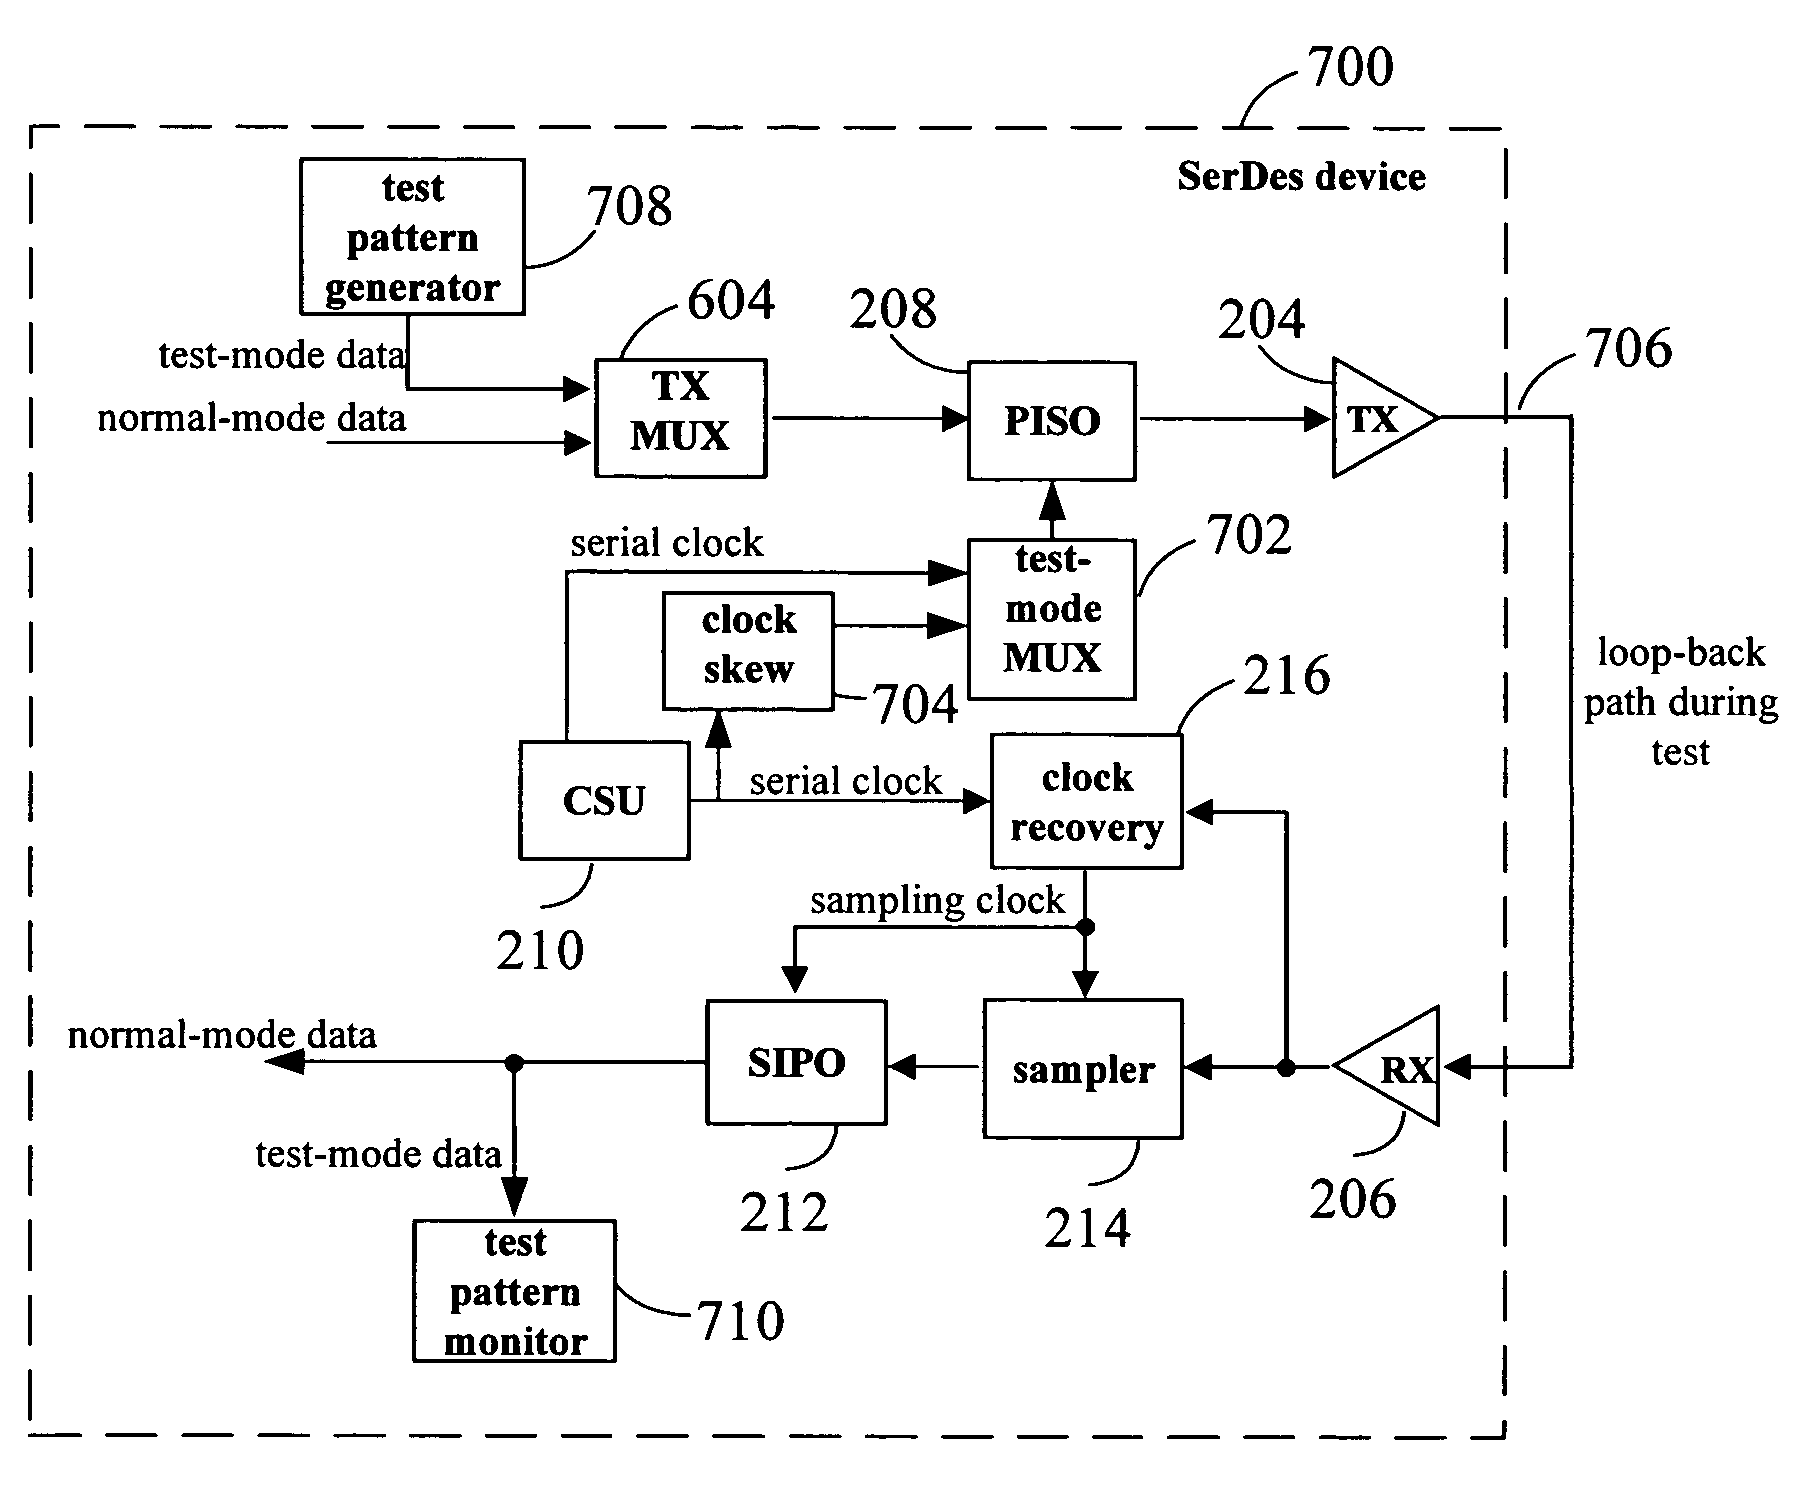 Systems and methods for a built in test circuit for asynchronous testing of high-speed transceivers